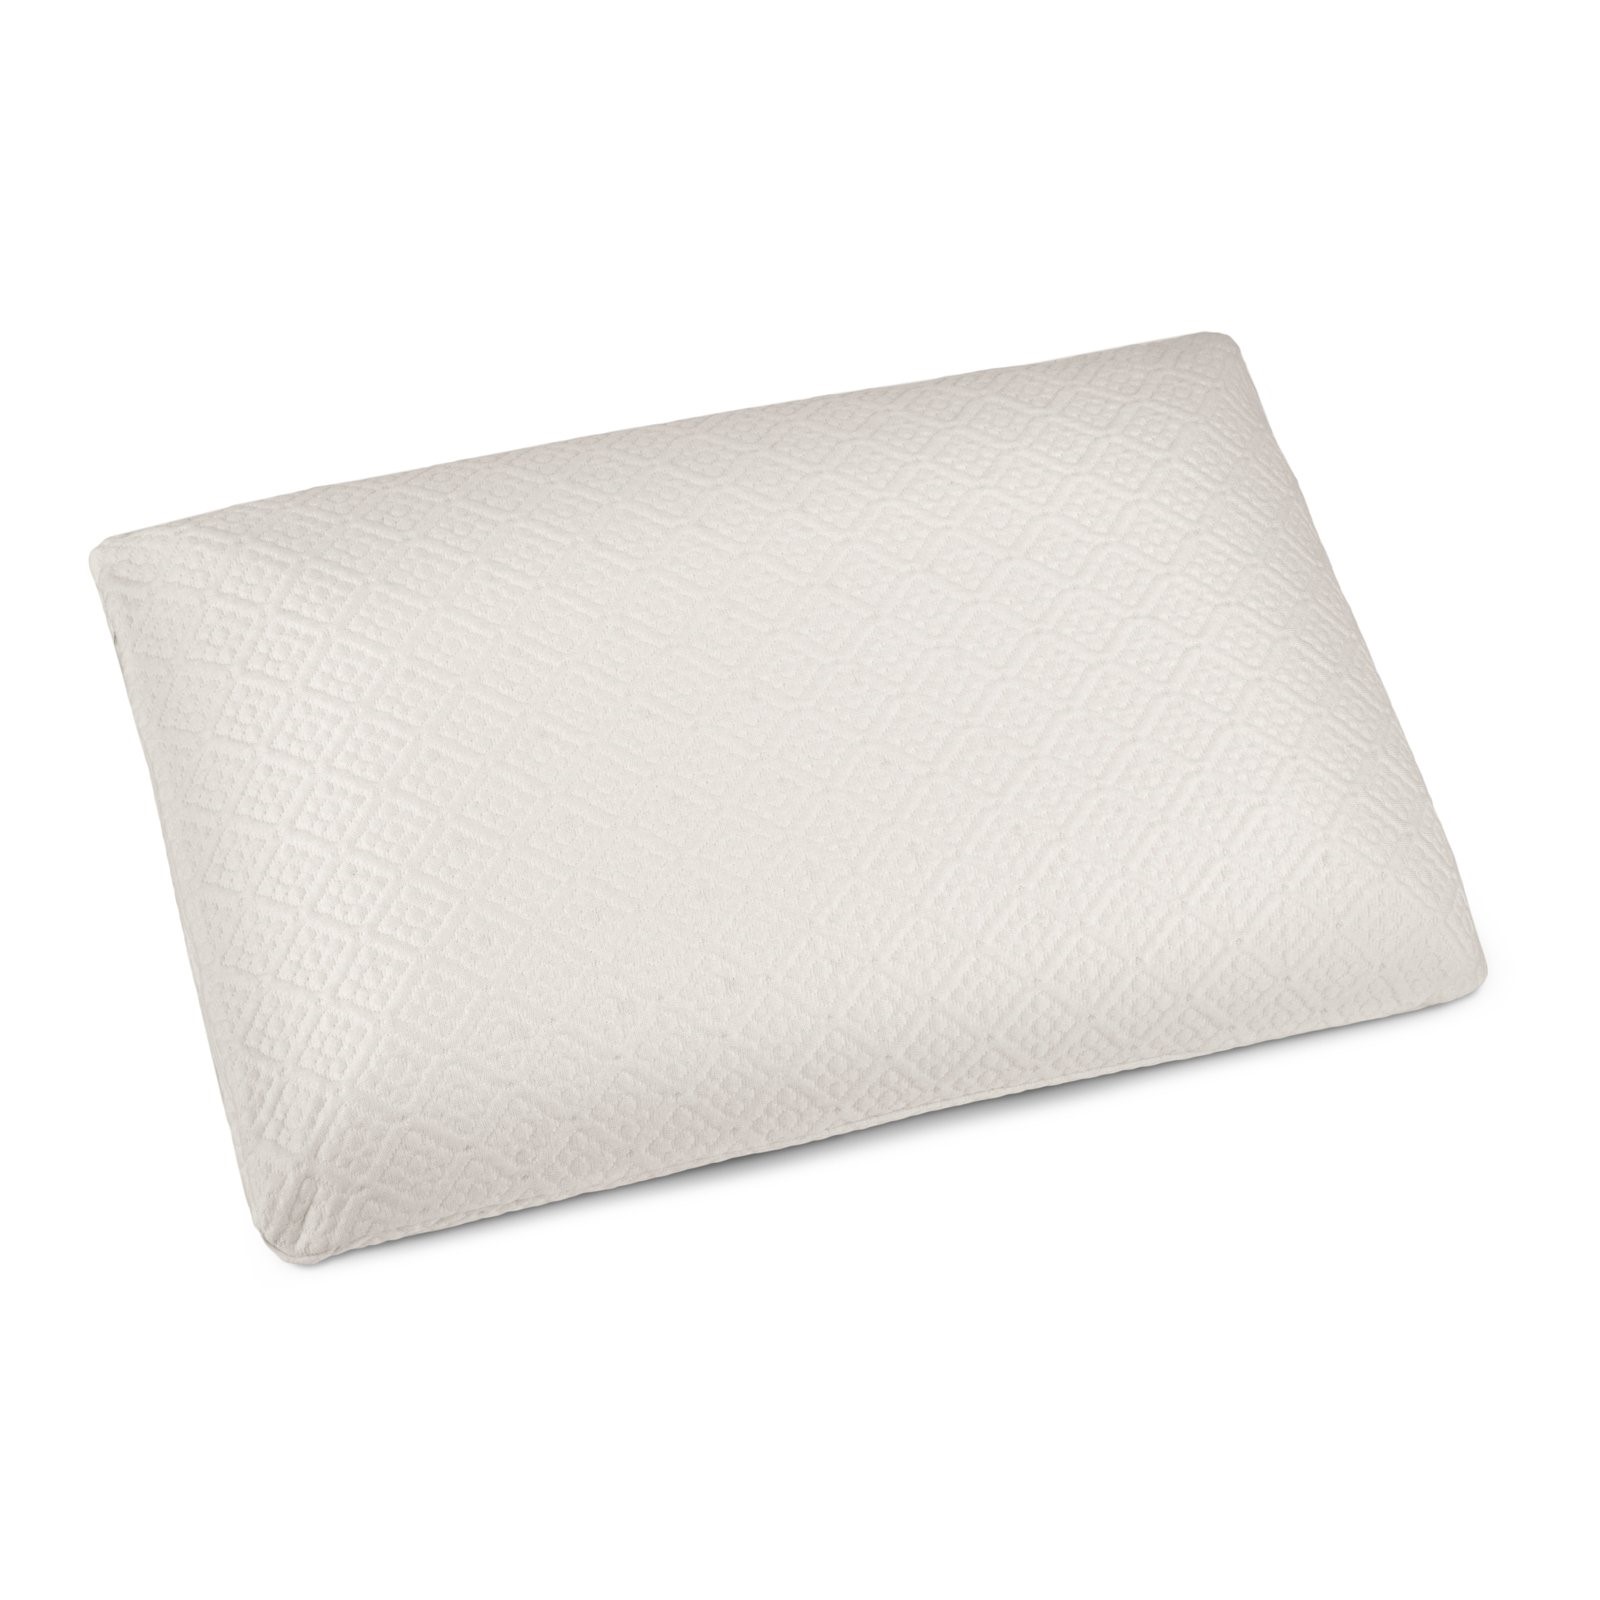 Rio Home Medium Standard Bed Pillow - image 2 of 3